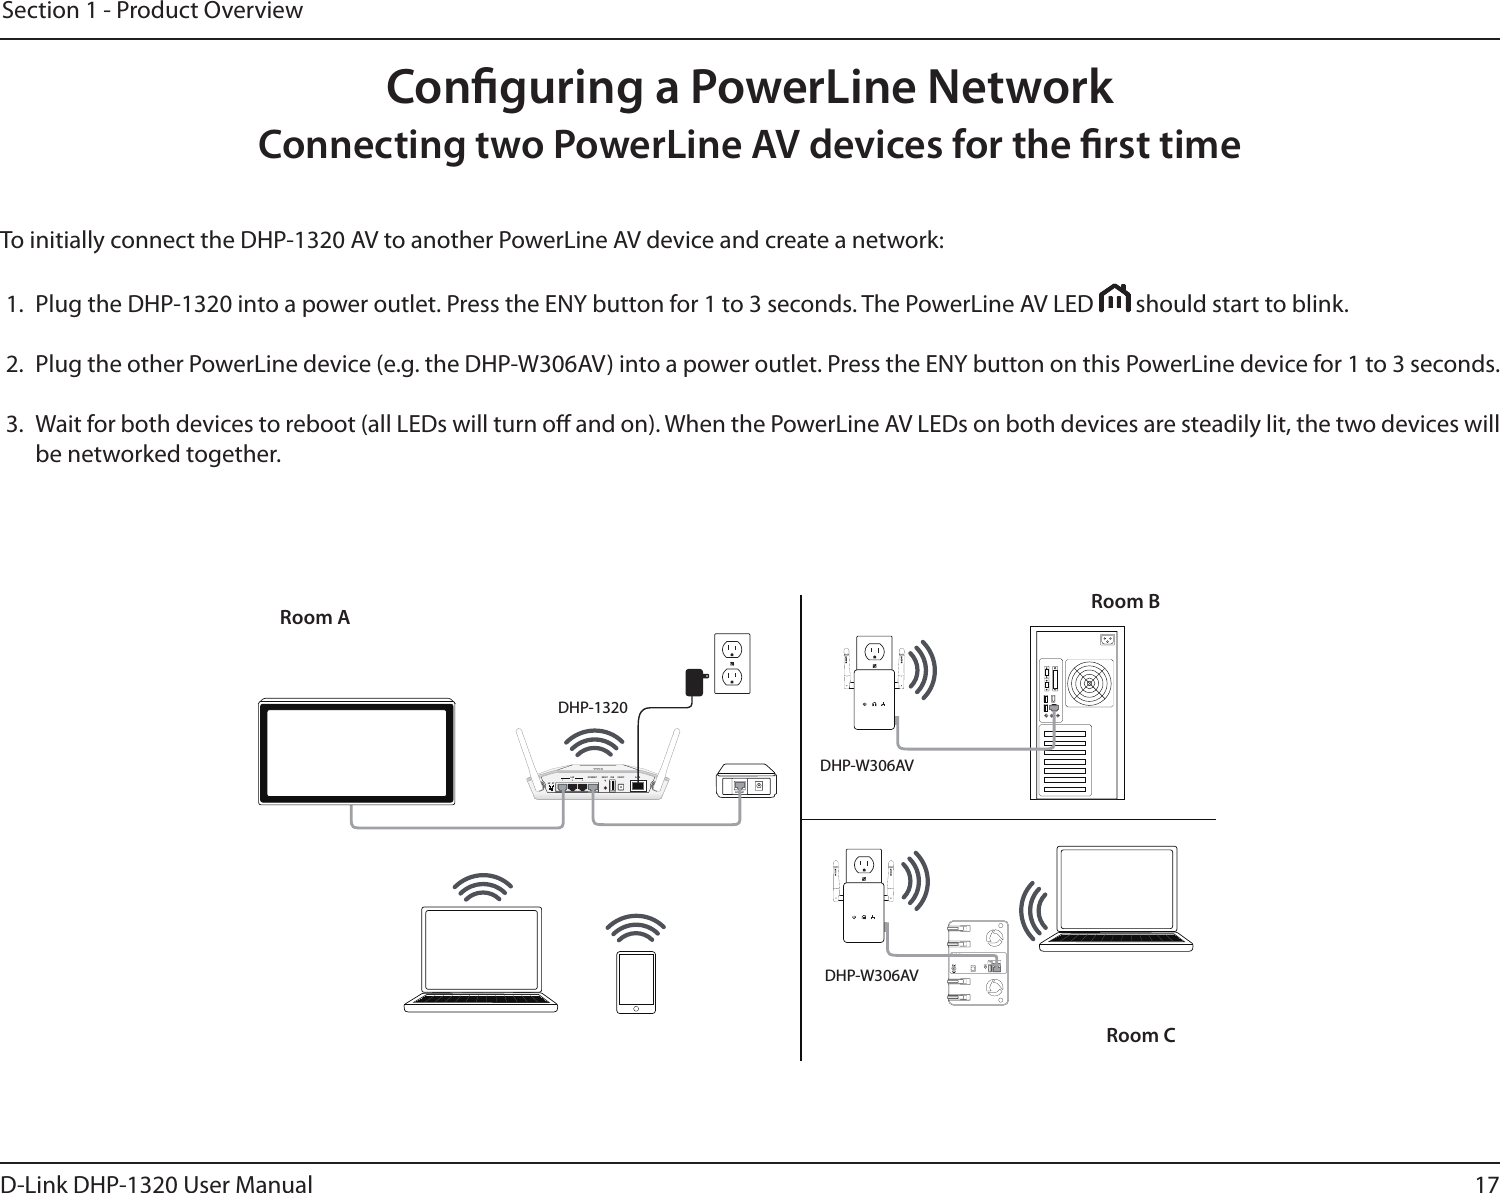 17D-Link DHP-1320 User ManualSection 1 - Product OverviewConguring a PowerLine NetworkConnecting two PowerLine AV devices for the rst timeTo initially connect the DHP-1320 AV to another PowerLine AV device and create a network:1.  Plug the DHP-1320 into a power outlet. Press the ENY button for 1 to 3 seconds. The PowerLine AV LED   should start to blink.2.  Plug the other PowerLine device (e.g. the DHP-W306AV) into a power outlet. Press the ENY button on this PowerLine device for 1 to 3 seconds. 3.  Wait for both devices to reboot (all LEDs will turn o and on). When the PowerLine AV LEDs on both devices are steadily lit, the two devices will be networked together. INTERNET1 2 3INTERNETLANAR RTUSBRESET ON/OFF AC ININTERNET1 2 3INTERNETLANAR RTUSBRESET ON/OFF AC INRoom BRoom ARoom CDHP-W306AVDHP-W306AVDHP-1320